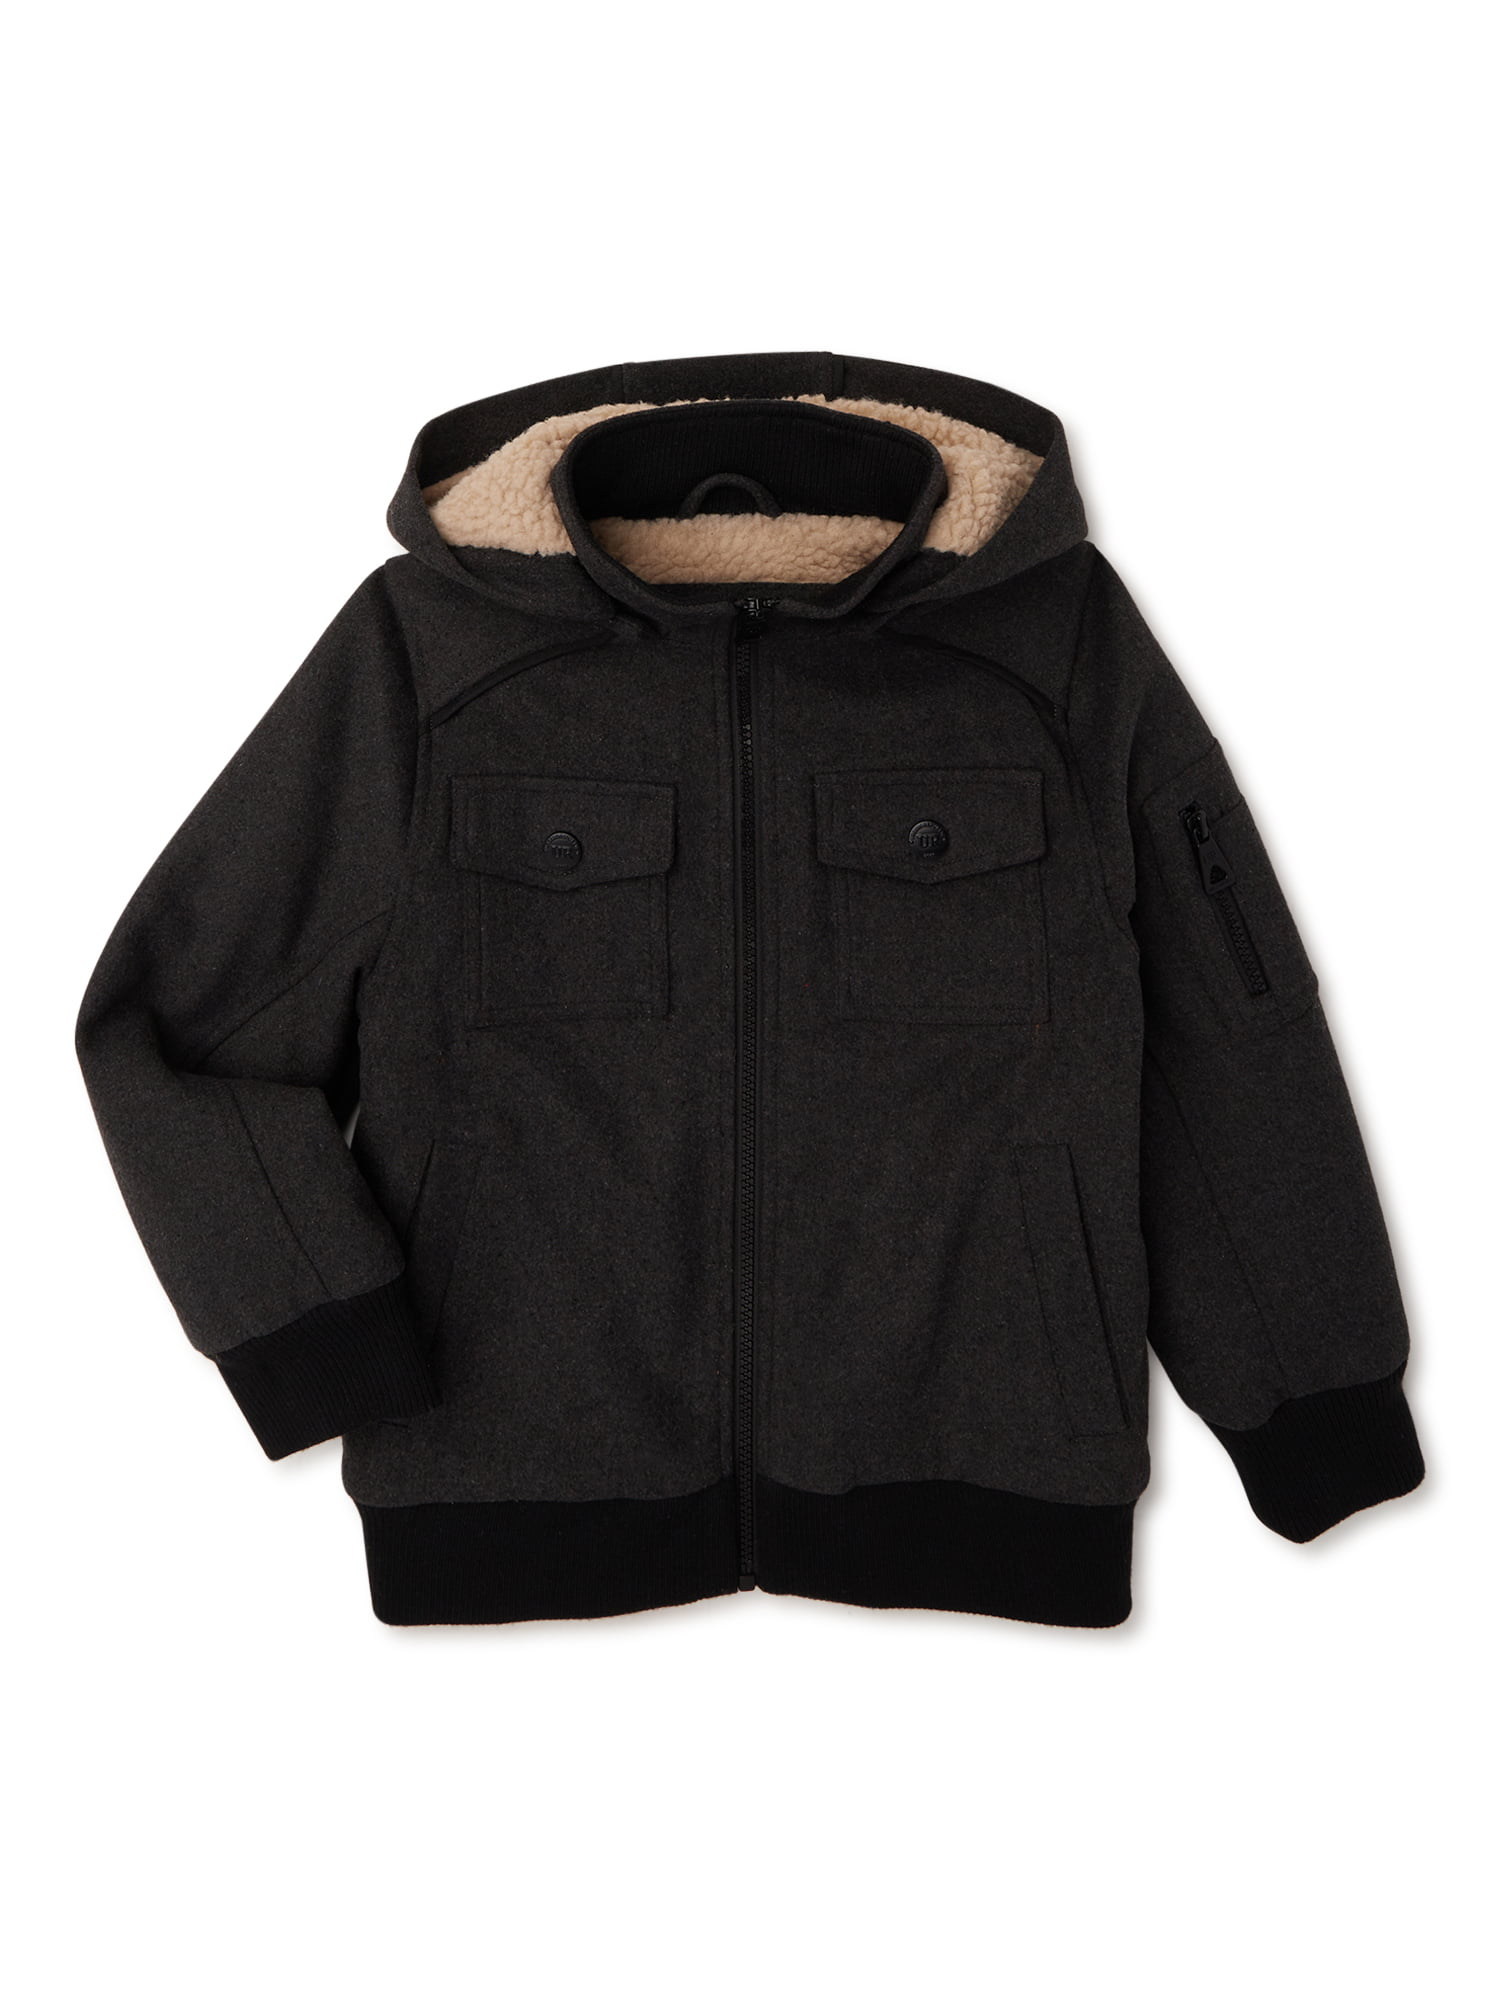 Urban Republic Boys' Wool Blend Peacoat with Faux-Fur Lining and Flap Pockets 